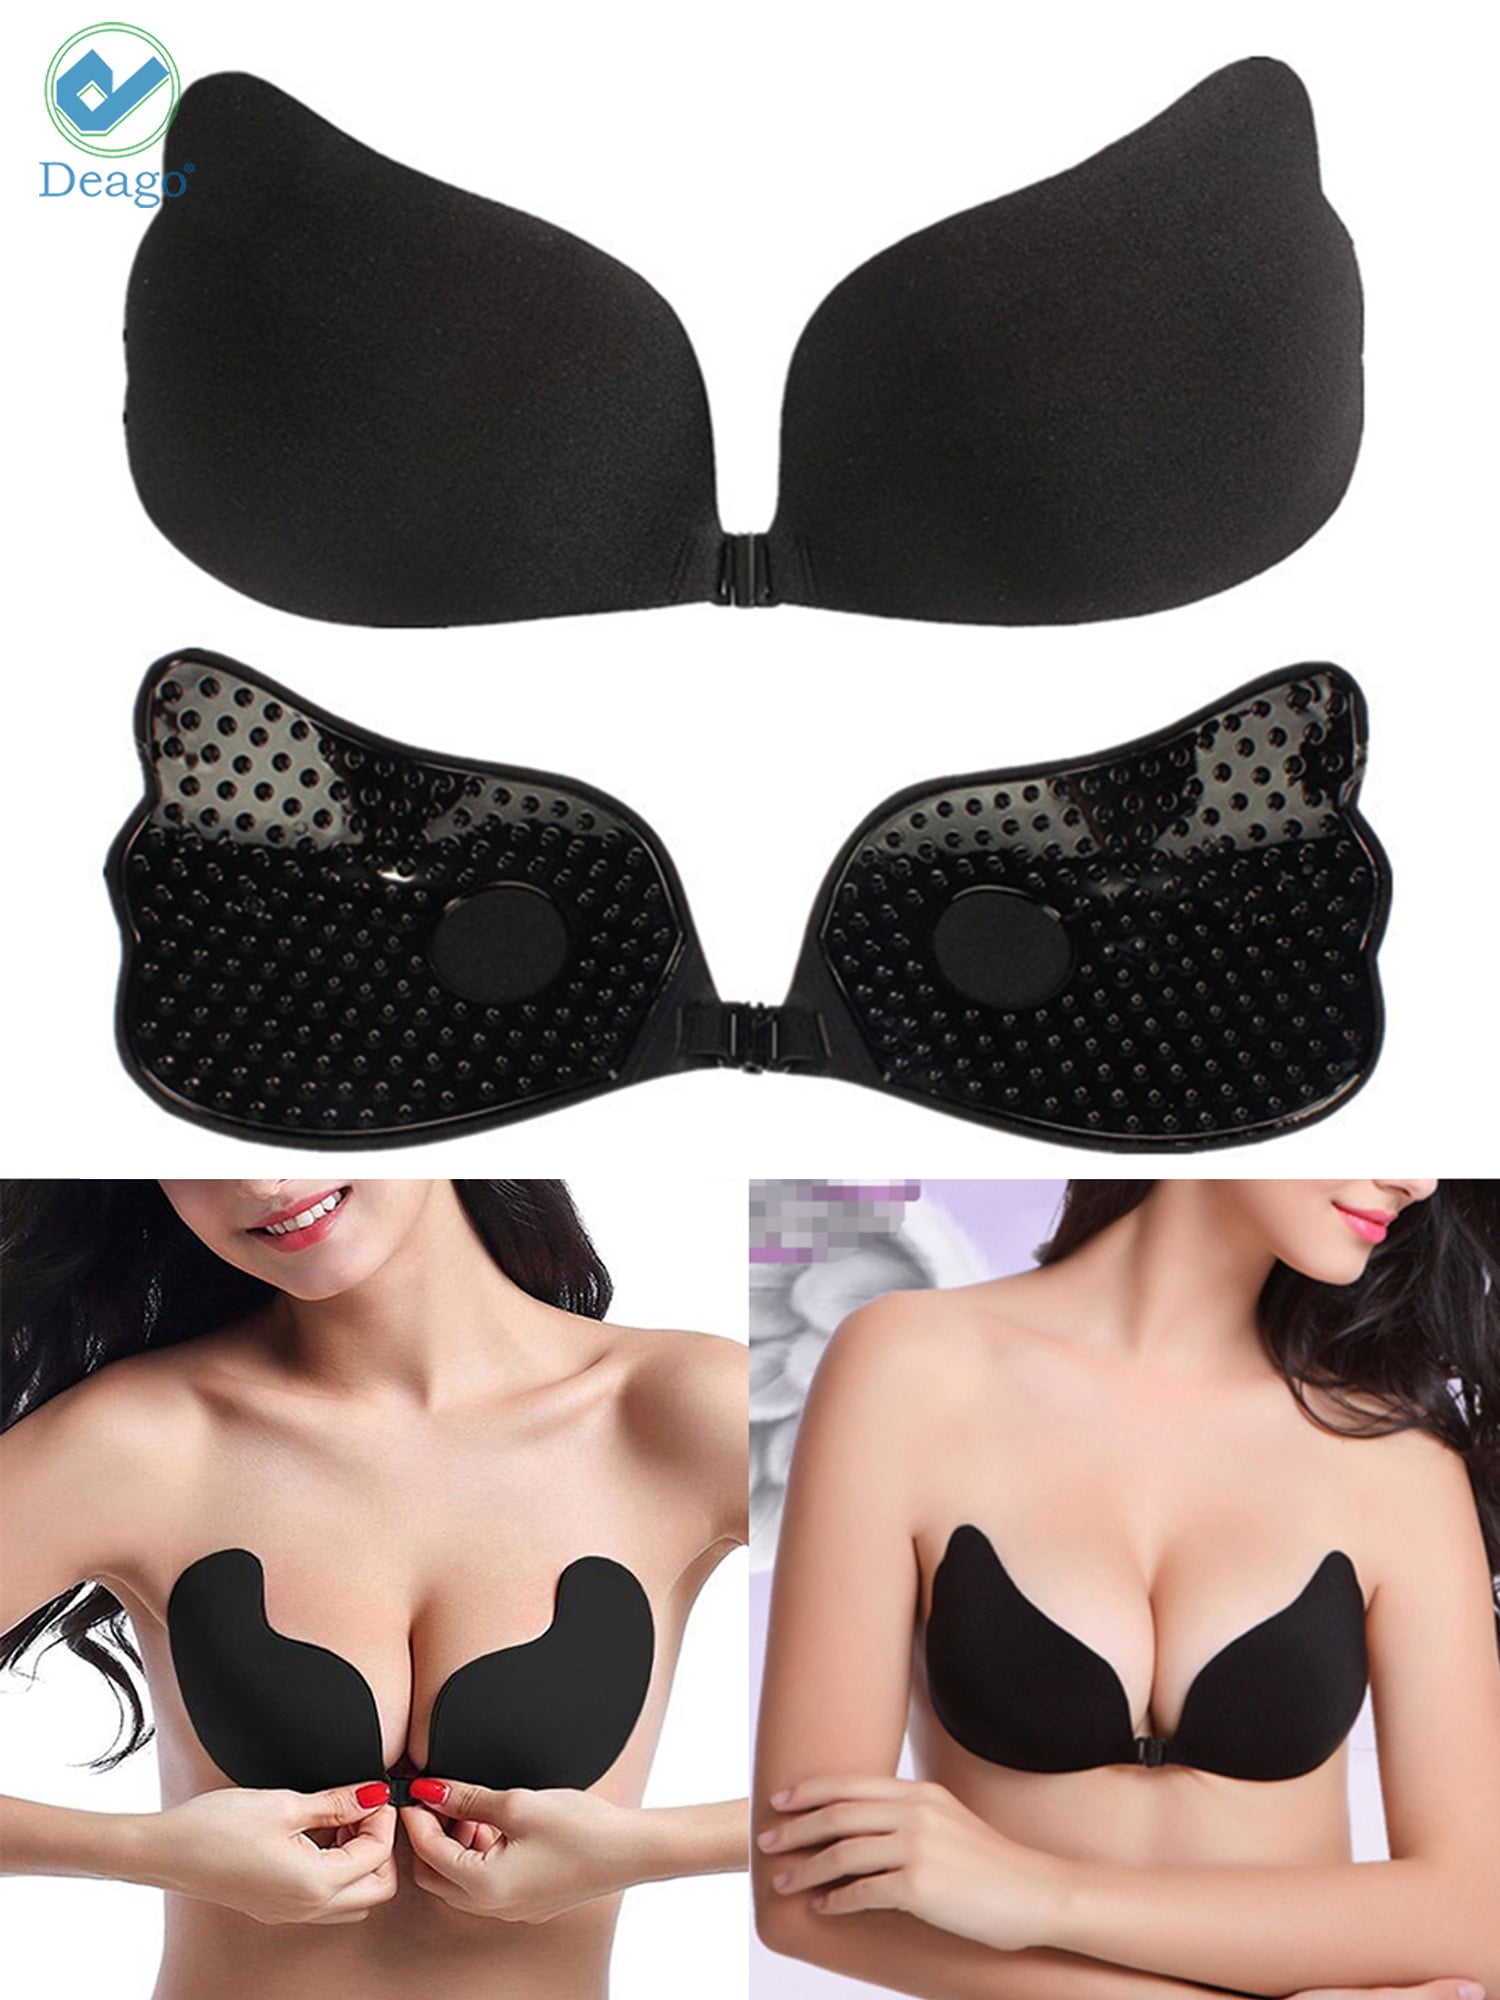 Deago Strapless Bra for Women, Self Adhesive Invisible Sticky Push Up  Halter Backless Cleavage Cover For Wedding Party Dress (2Pcs/A) 